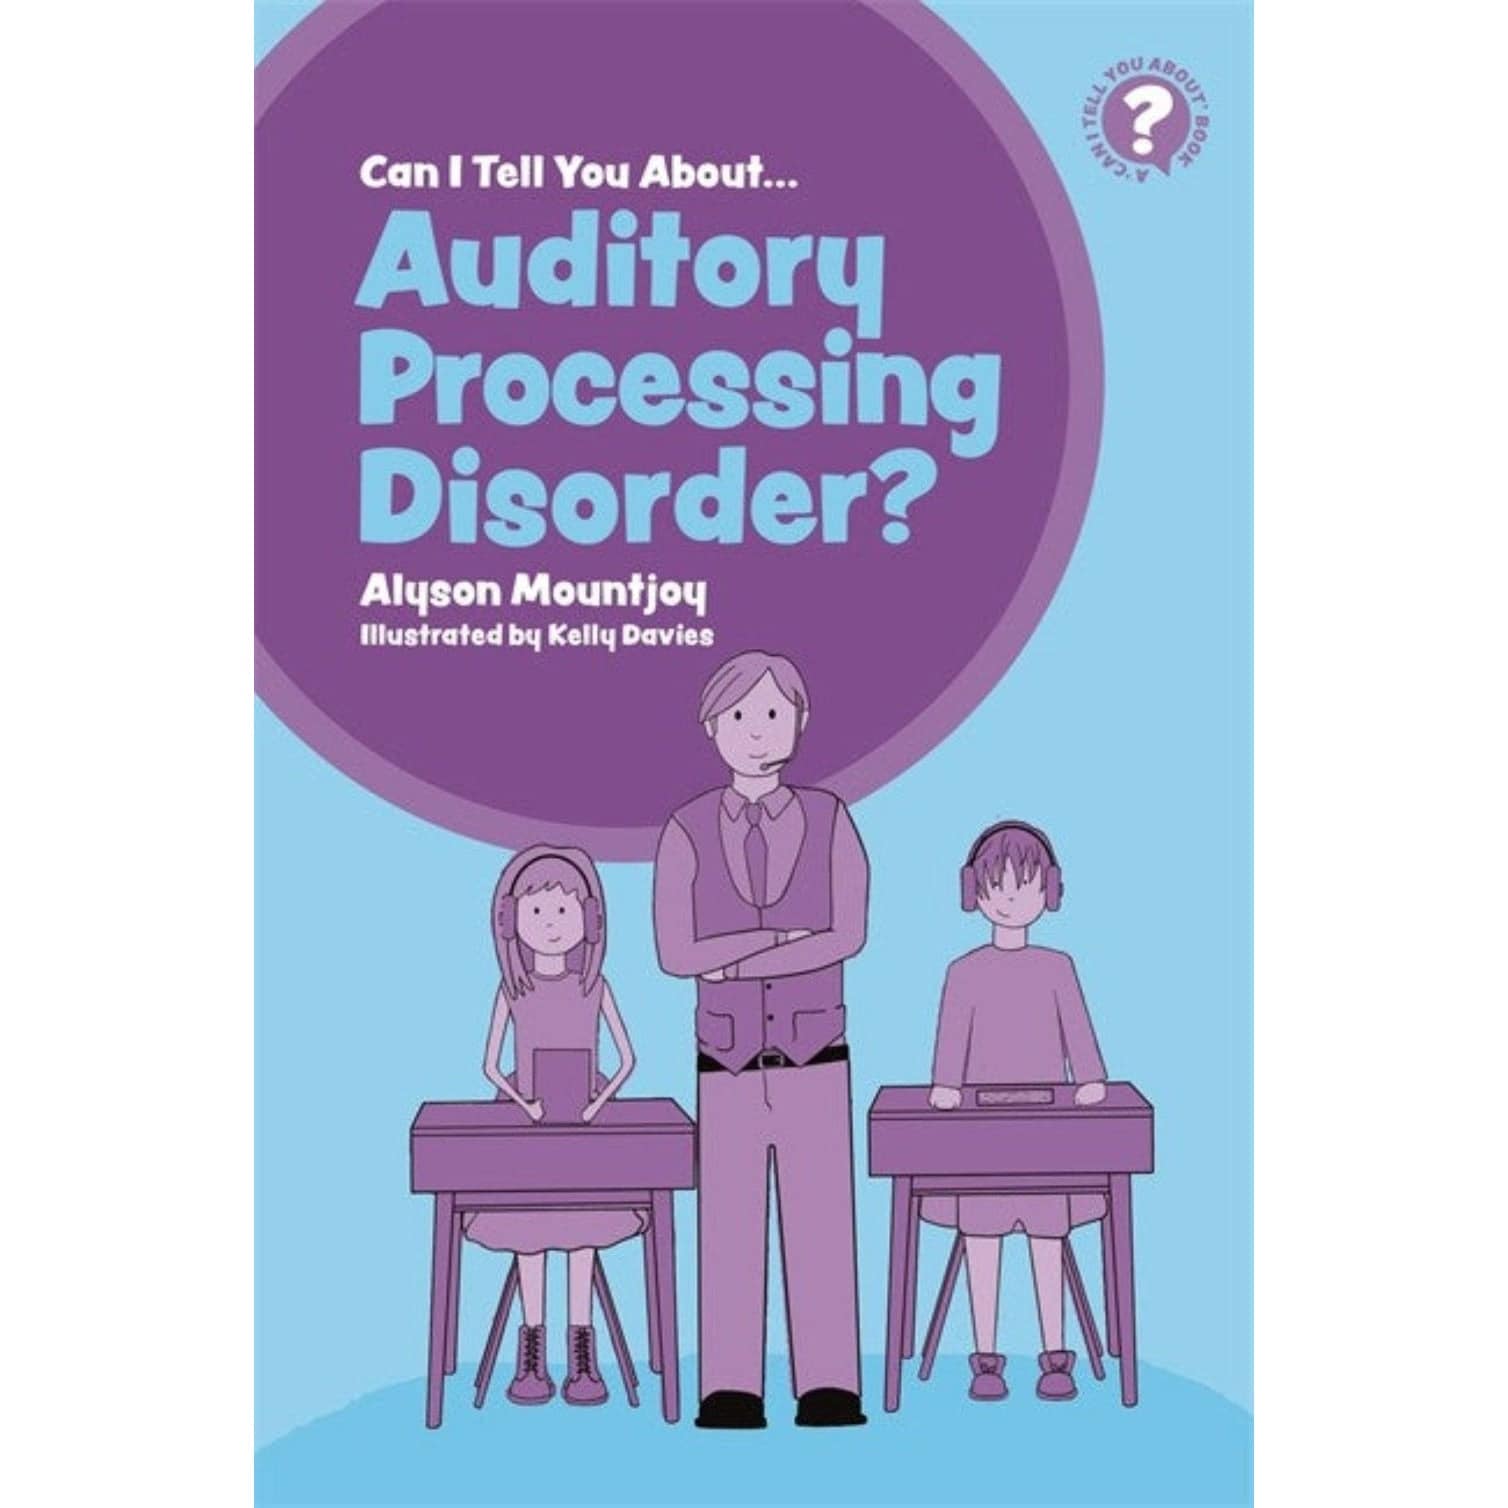 Can I tell you about Auditory Processing Disorder?: A Guide for Friends, Family and Professionals - Sensory Circle